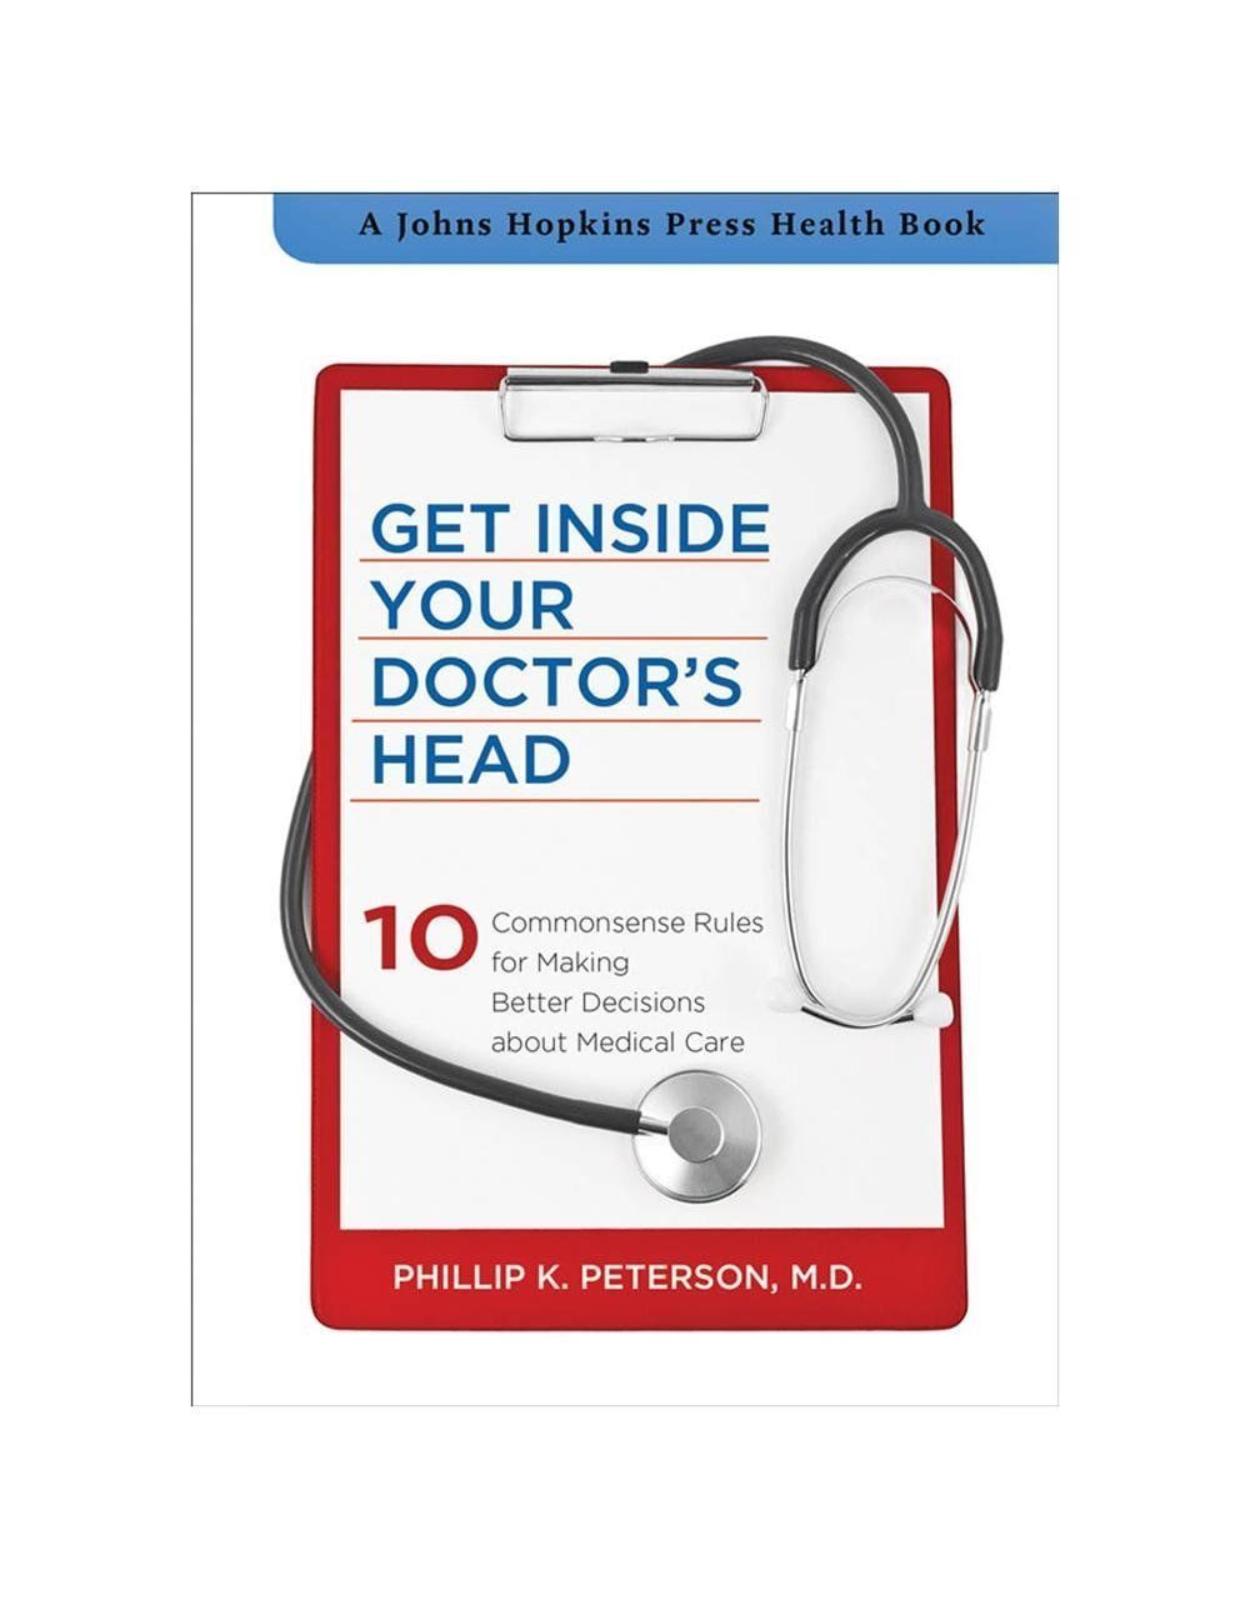 Get Inside Your Doctor's Head. Ten Commonsense Rules for Making Better Decisions about Medical Care